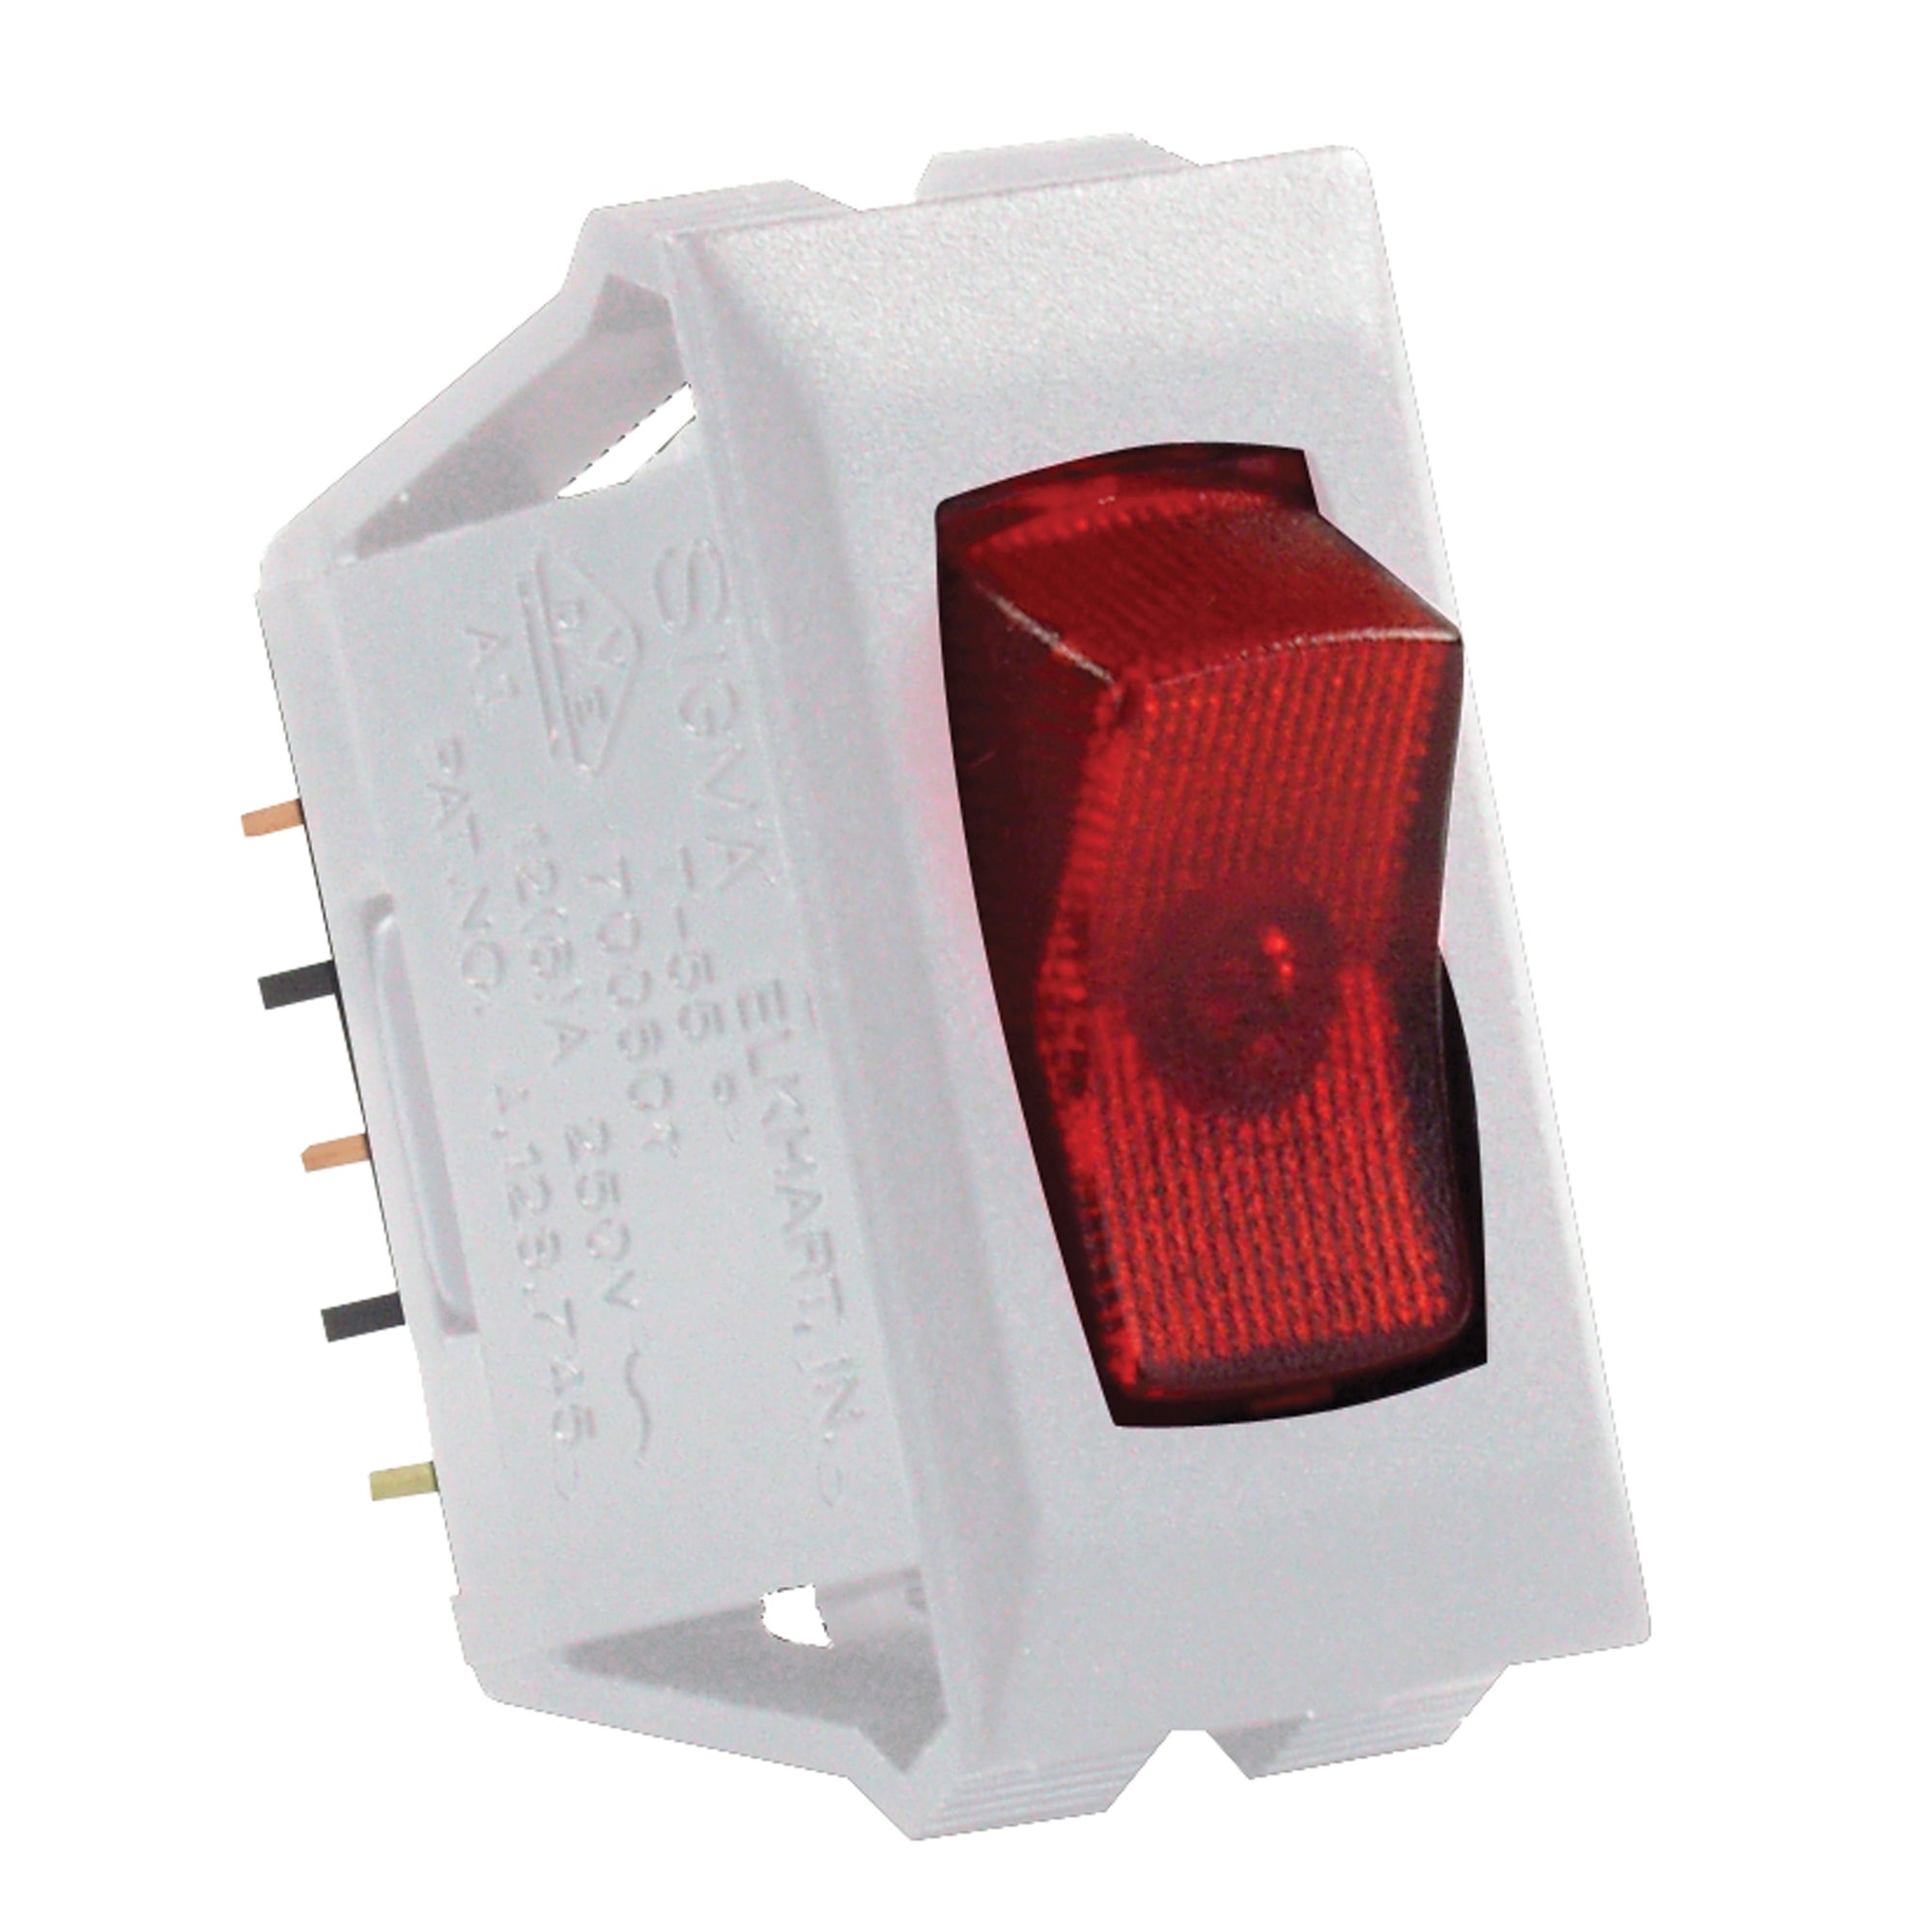 JR Products 12505 Illuminated 12V On/Off Switch - Red/White